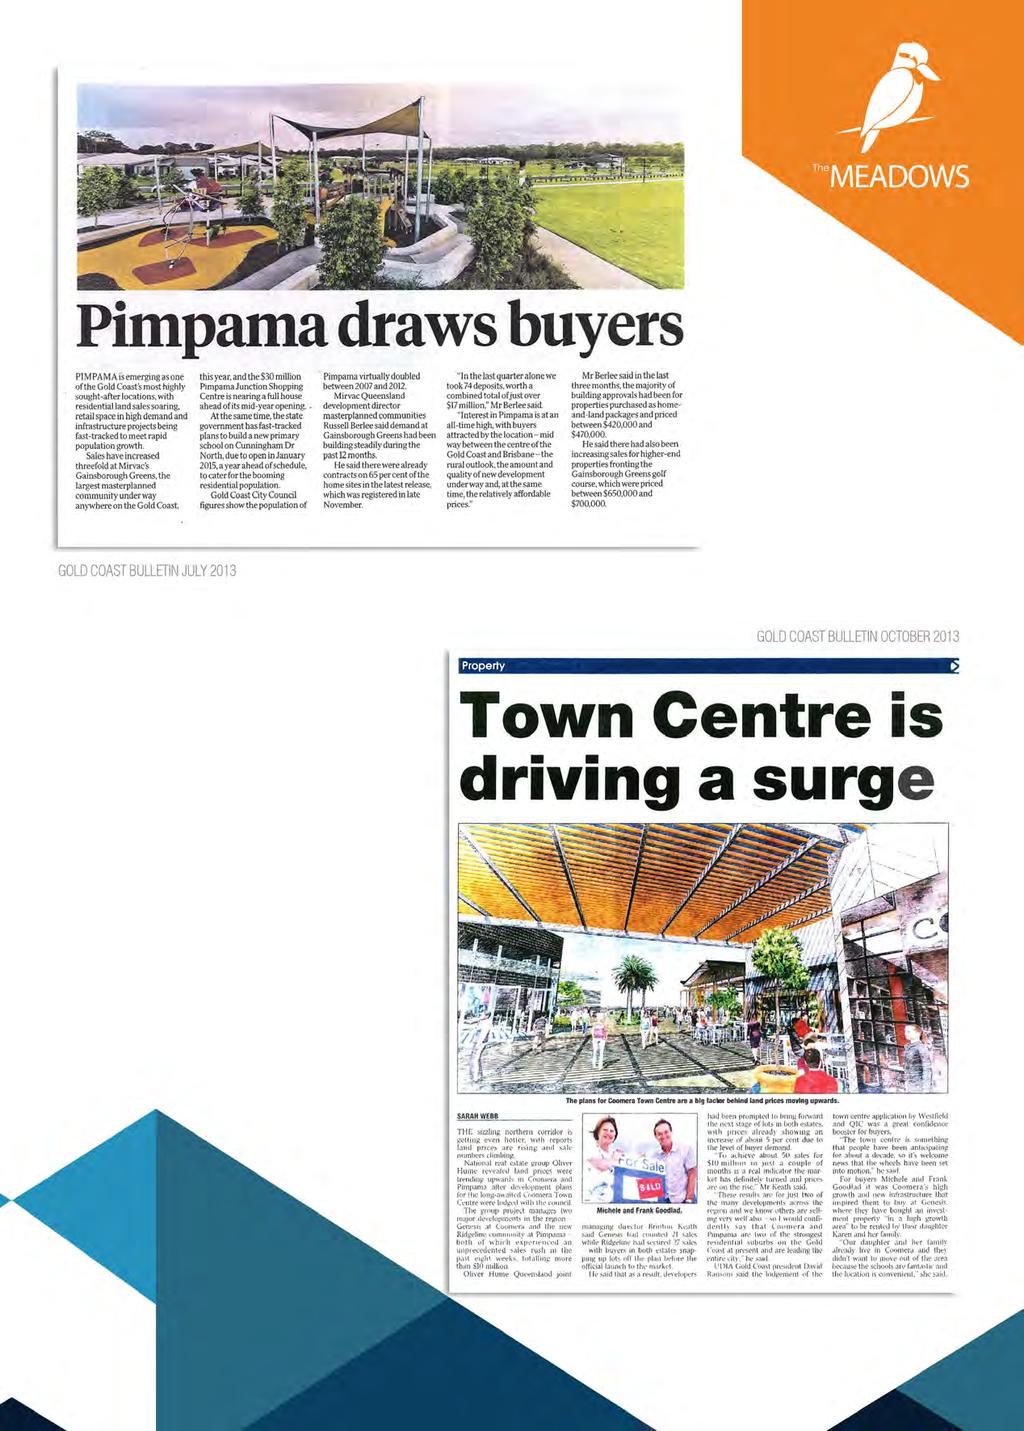 Pimpama is emerging as one of the most highly sought after locations, with residential land sales soaring.